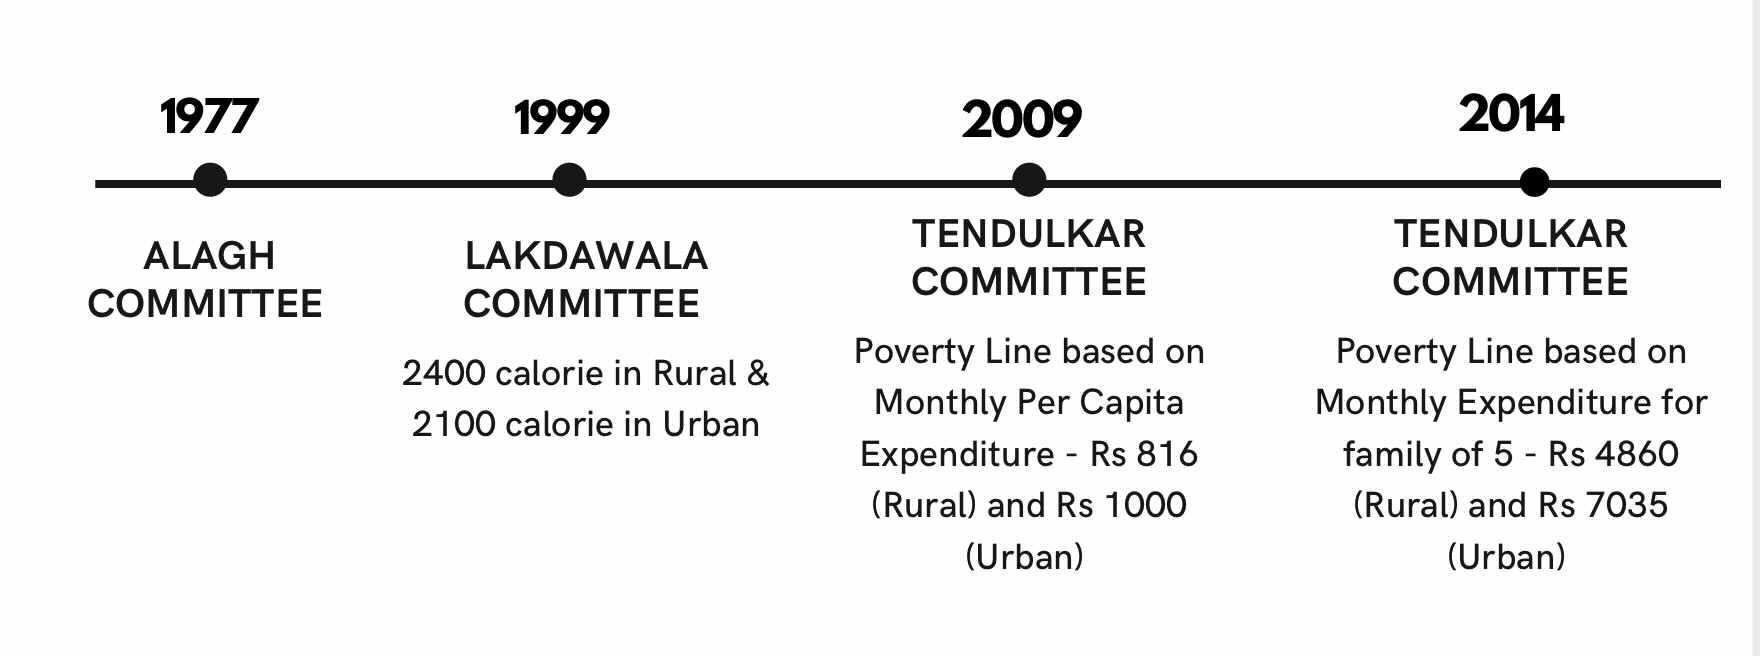 Timeline of Committees to define Poverty